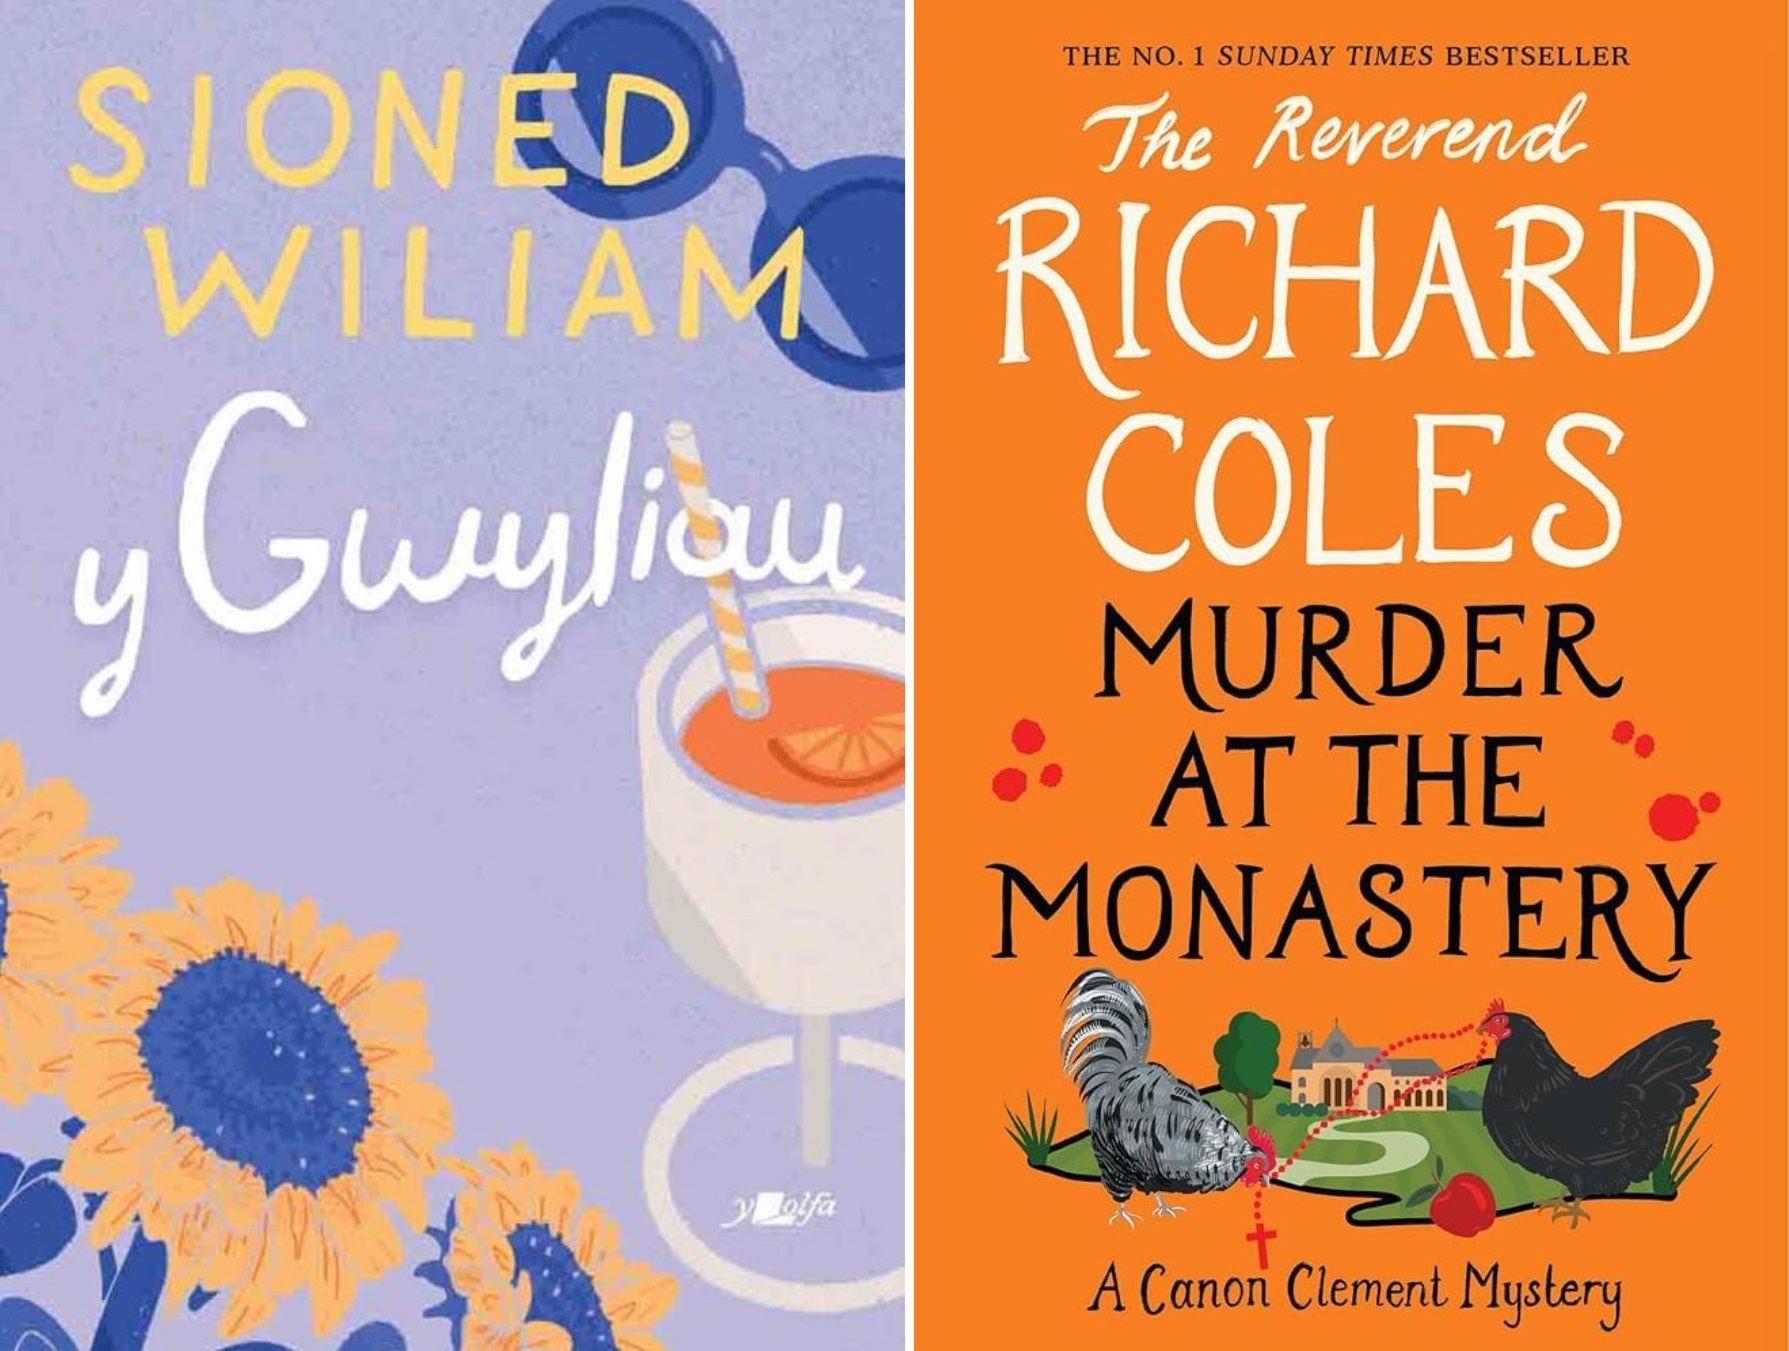 Y Gwyliau by Sioned William and Murder at the Monastery by Reverend Richard Coles.